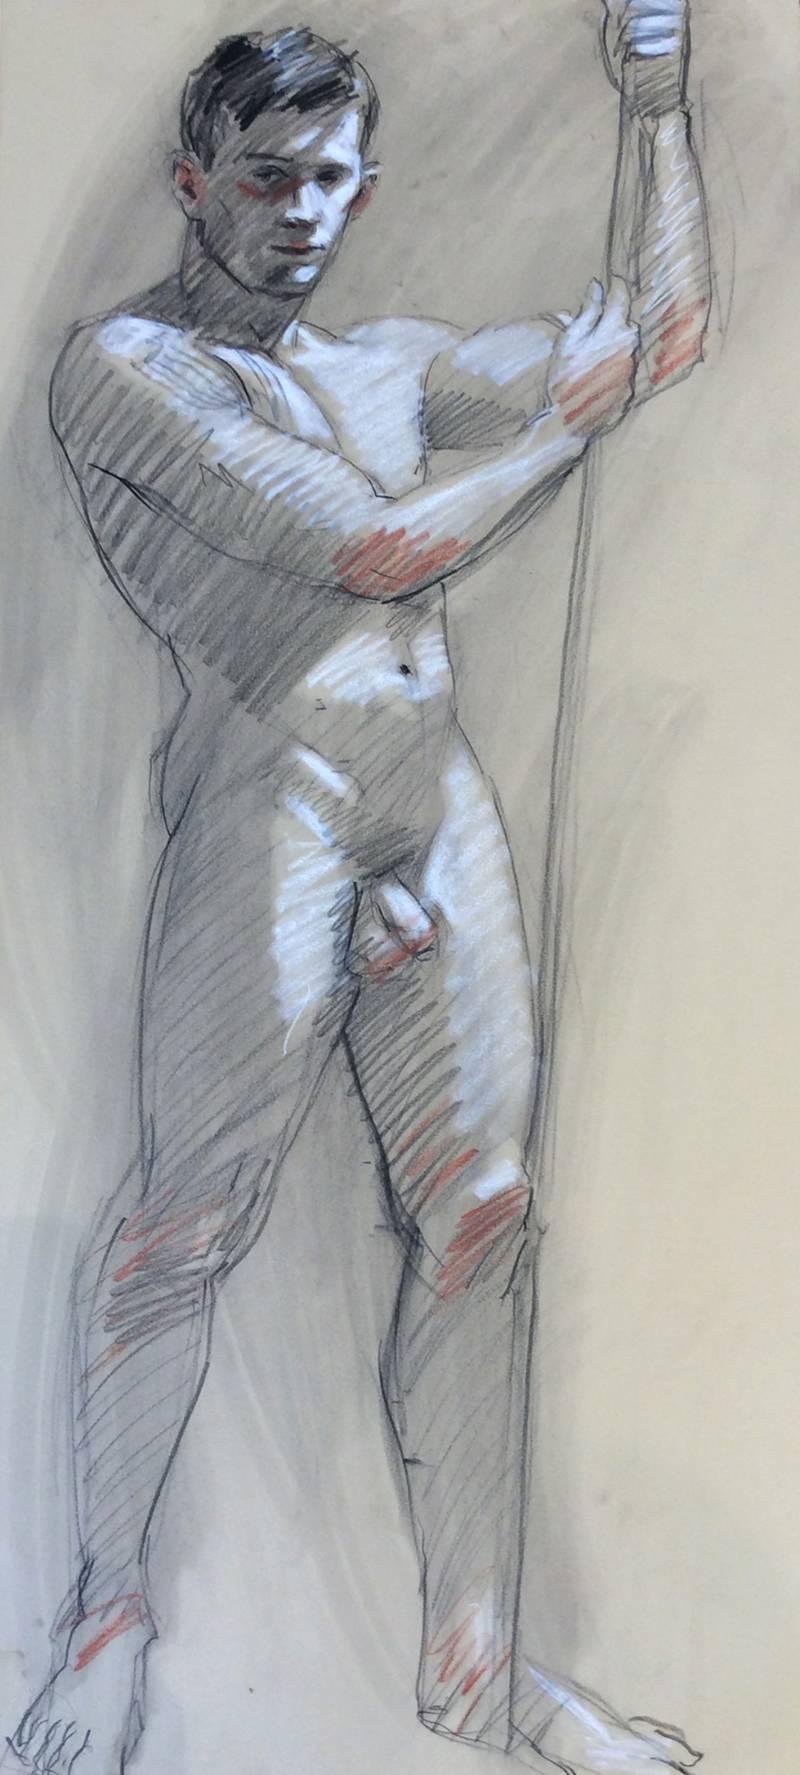 MB 801 A&B (Double Sided Figurative Charcoal Drawing of Two Male Nudes) - Modern Art by Mark Beard